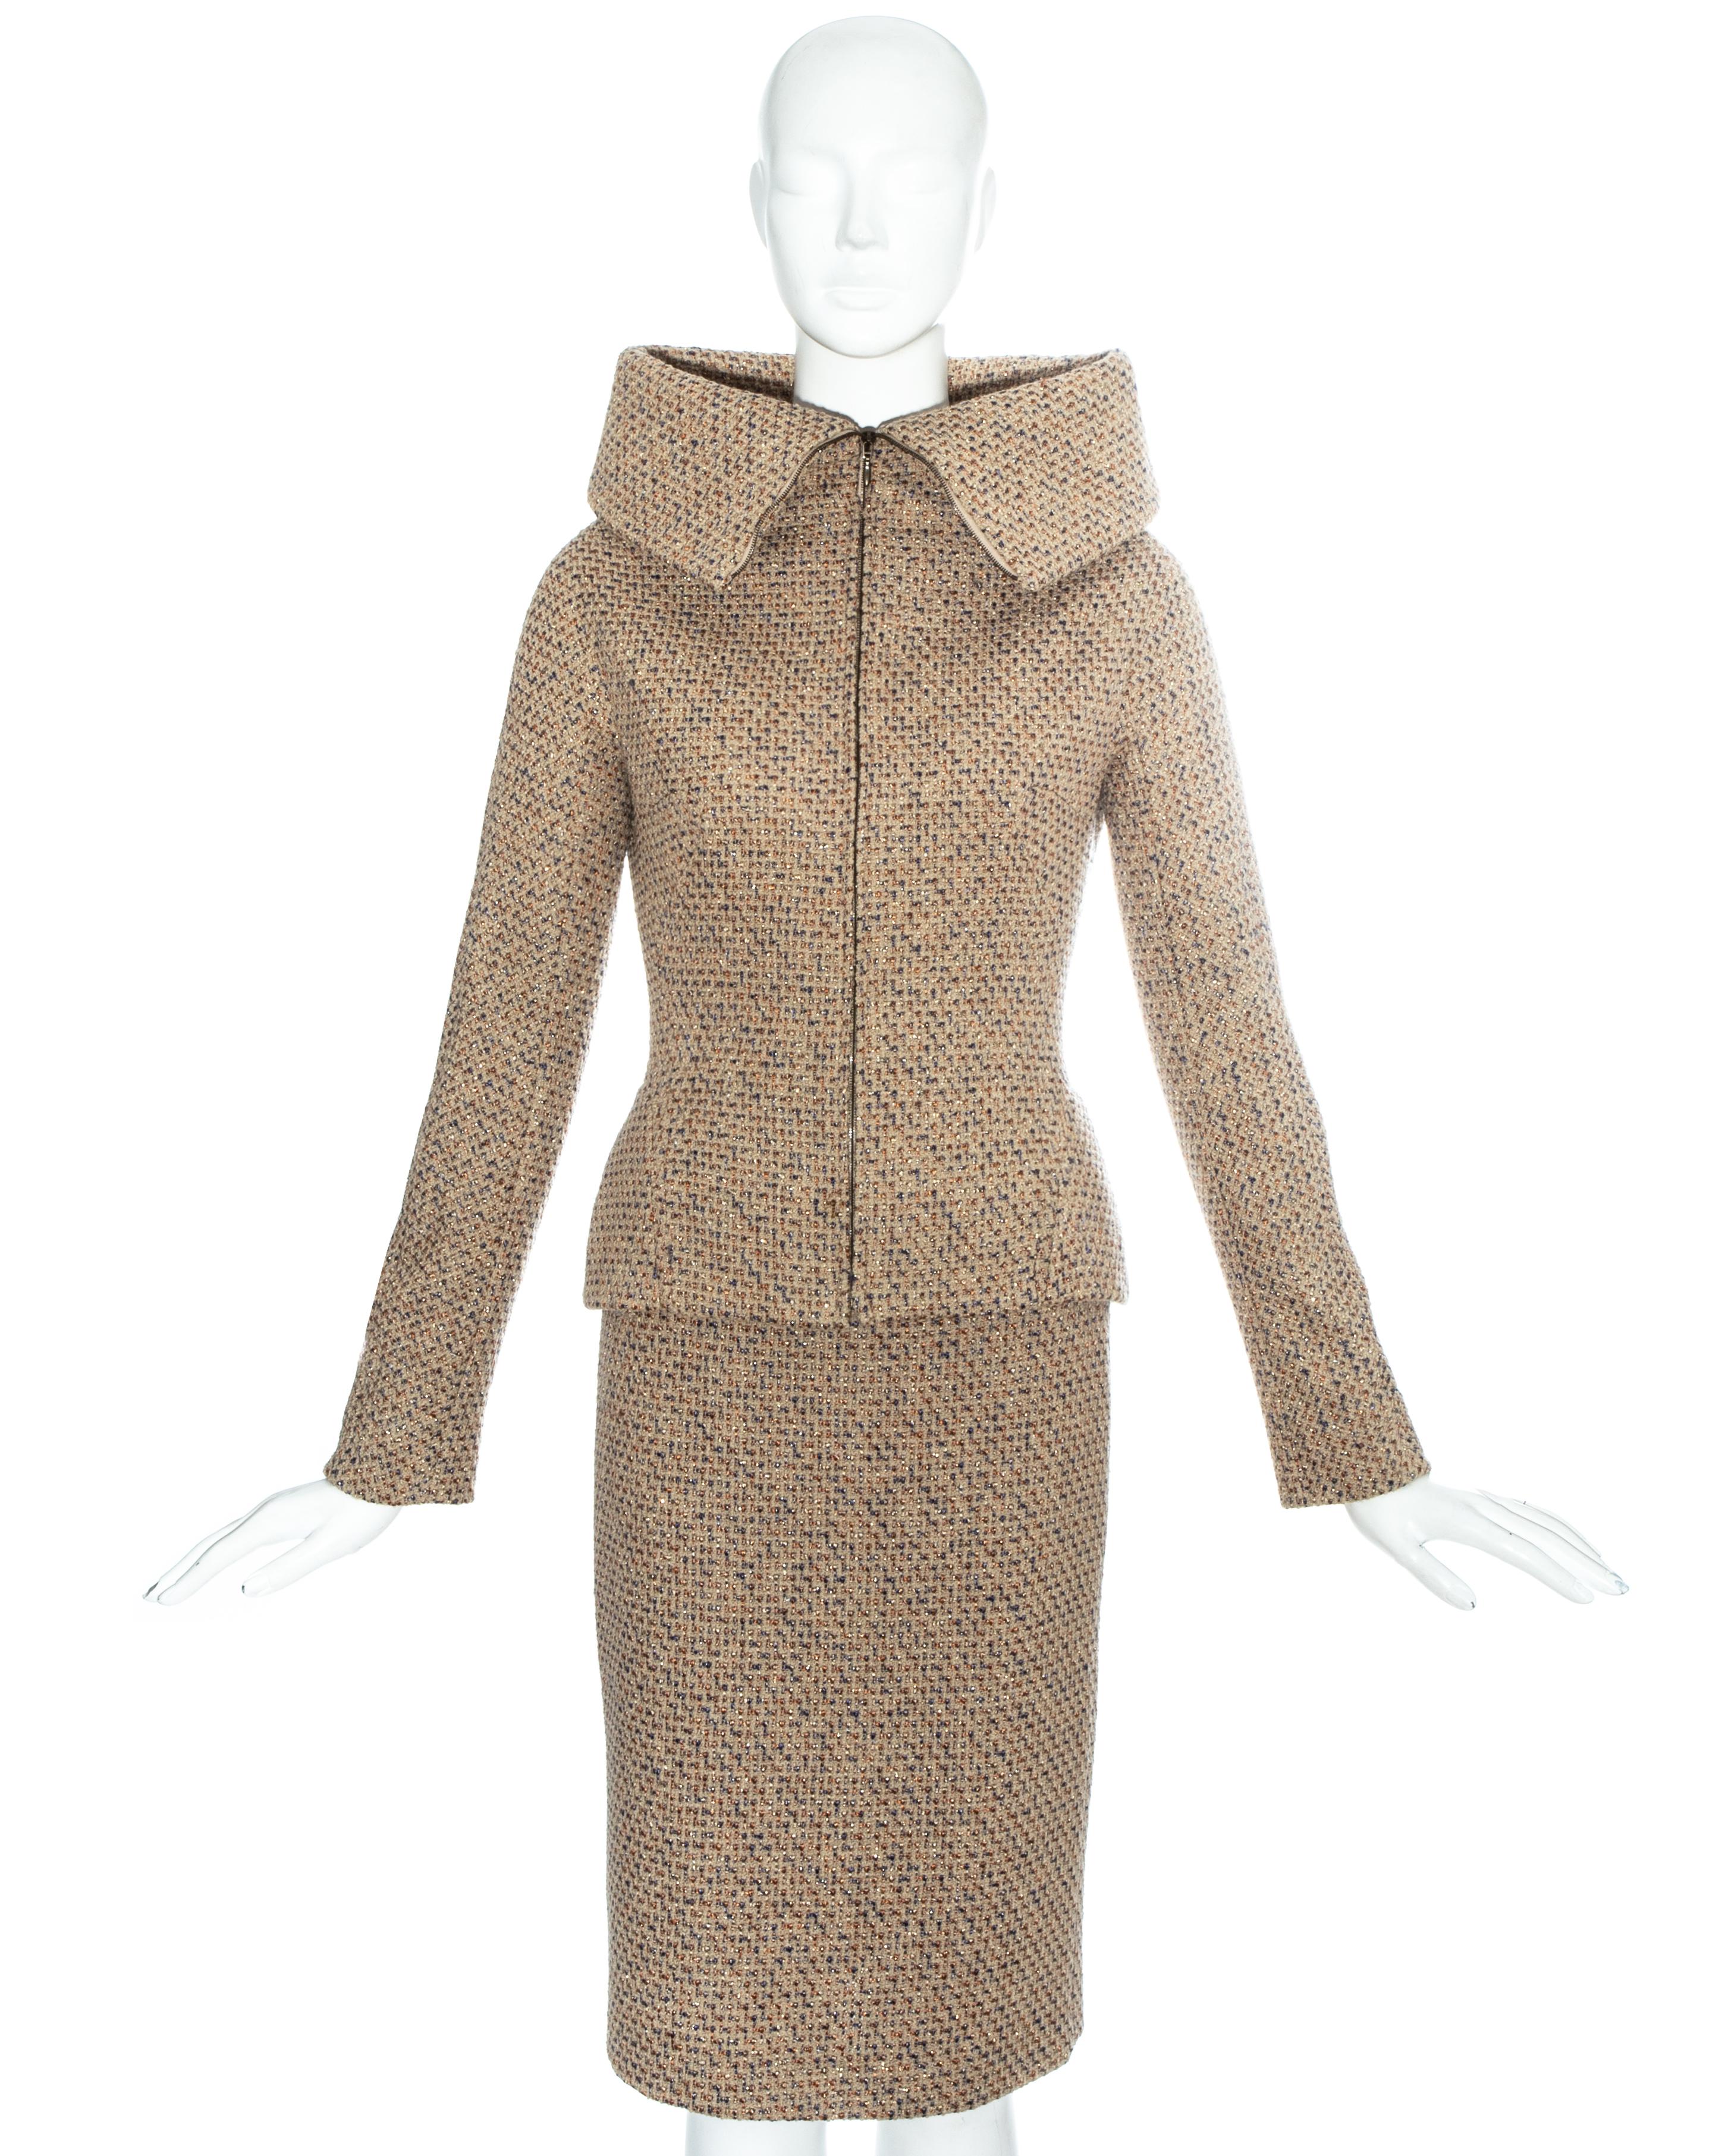 Alexander McQueen metallic tweed skirt suit. Structured jacket with high turn-over collar, front zip fastening, silk lining and Chanel style chain on the hem. Sold with matching knee length pencil skirt. 

Fall-Winter 2004